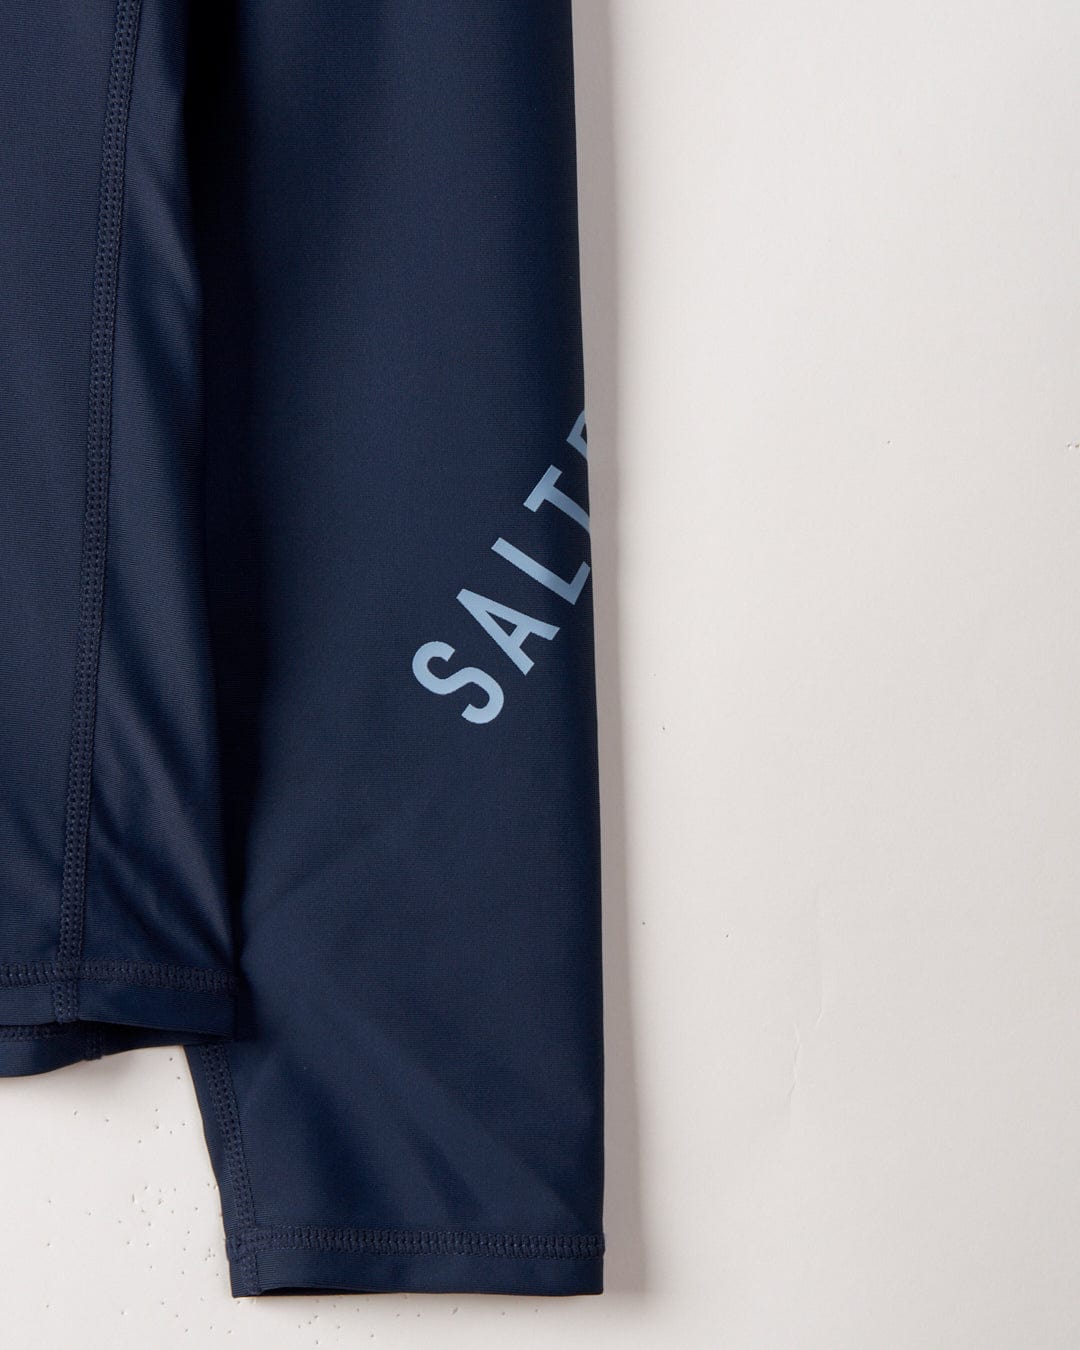 Close-up of SR Original - Recycled Mens Long Sleeve Rashvest - Blue with the word "salt" printed in light gray letters, hanging against a textured white wall.